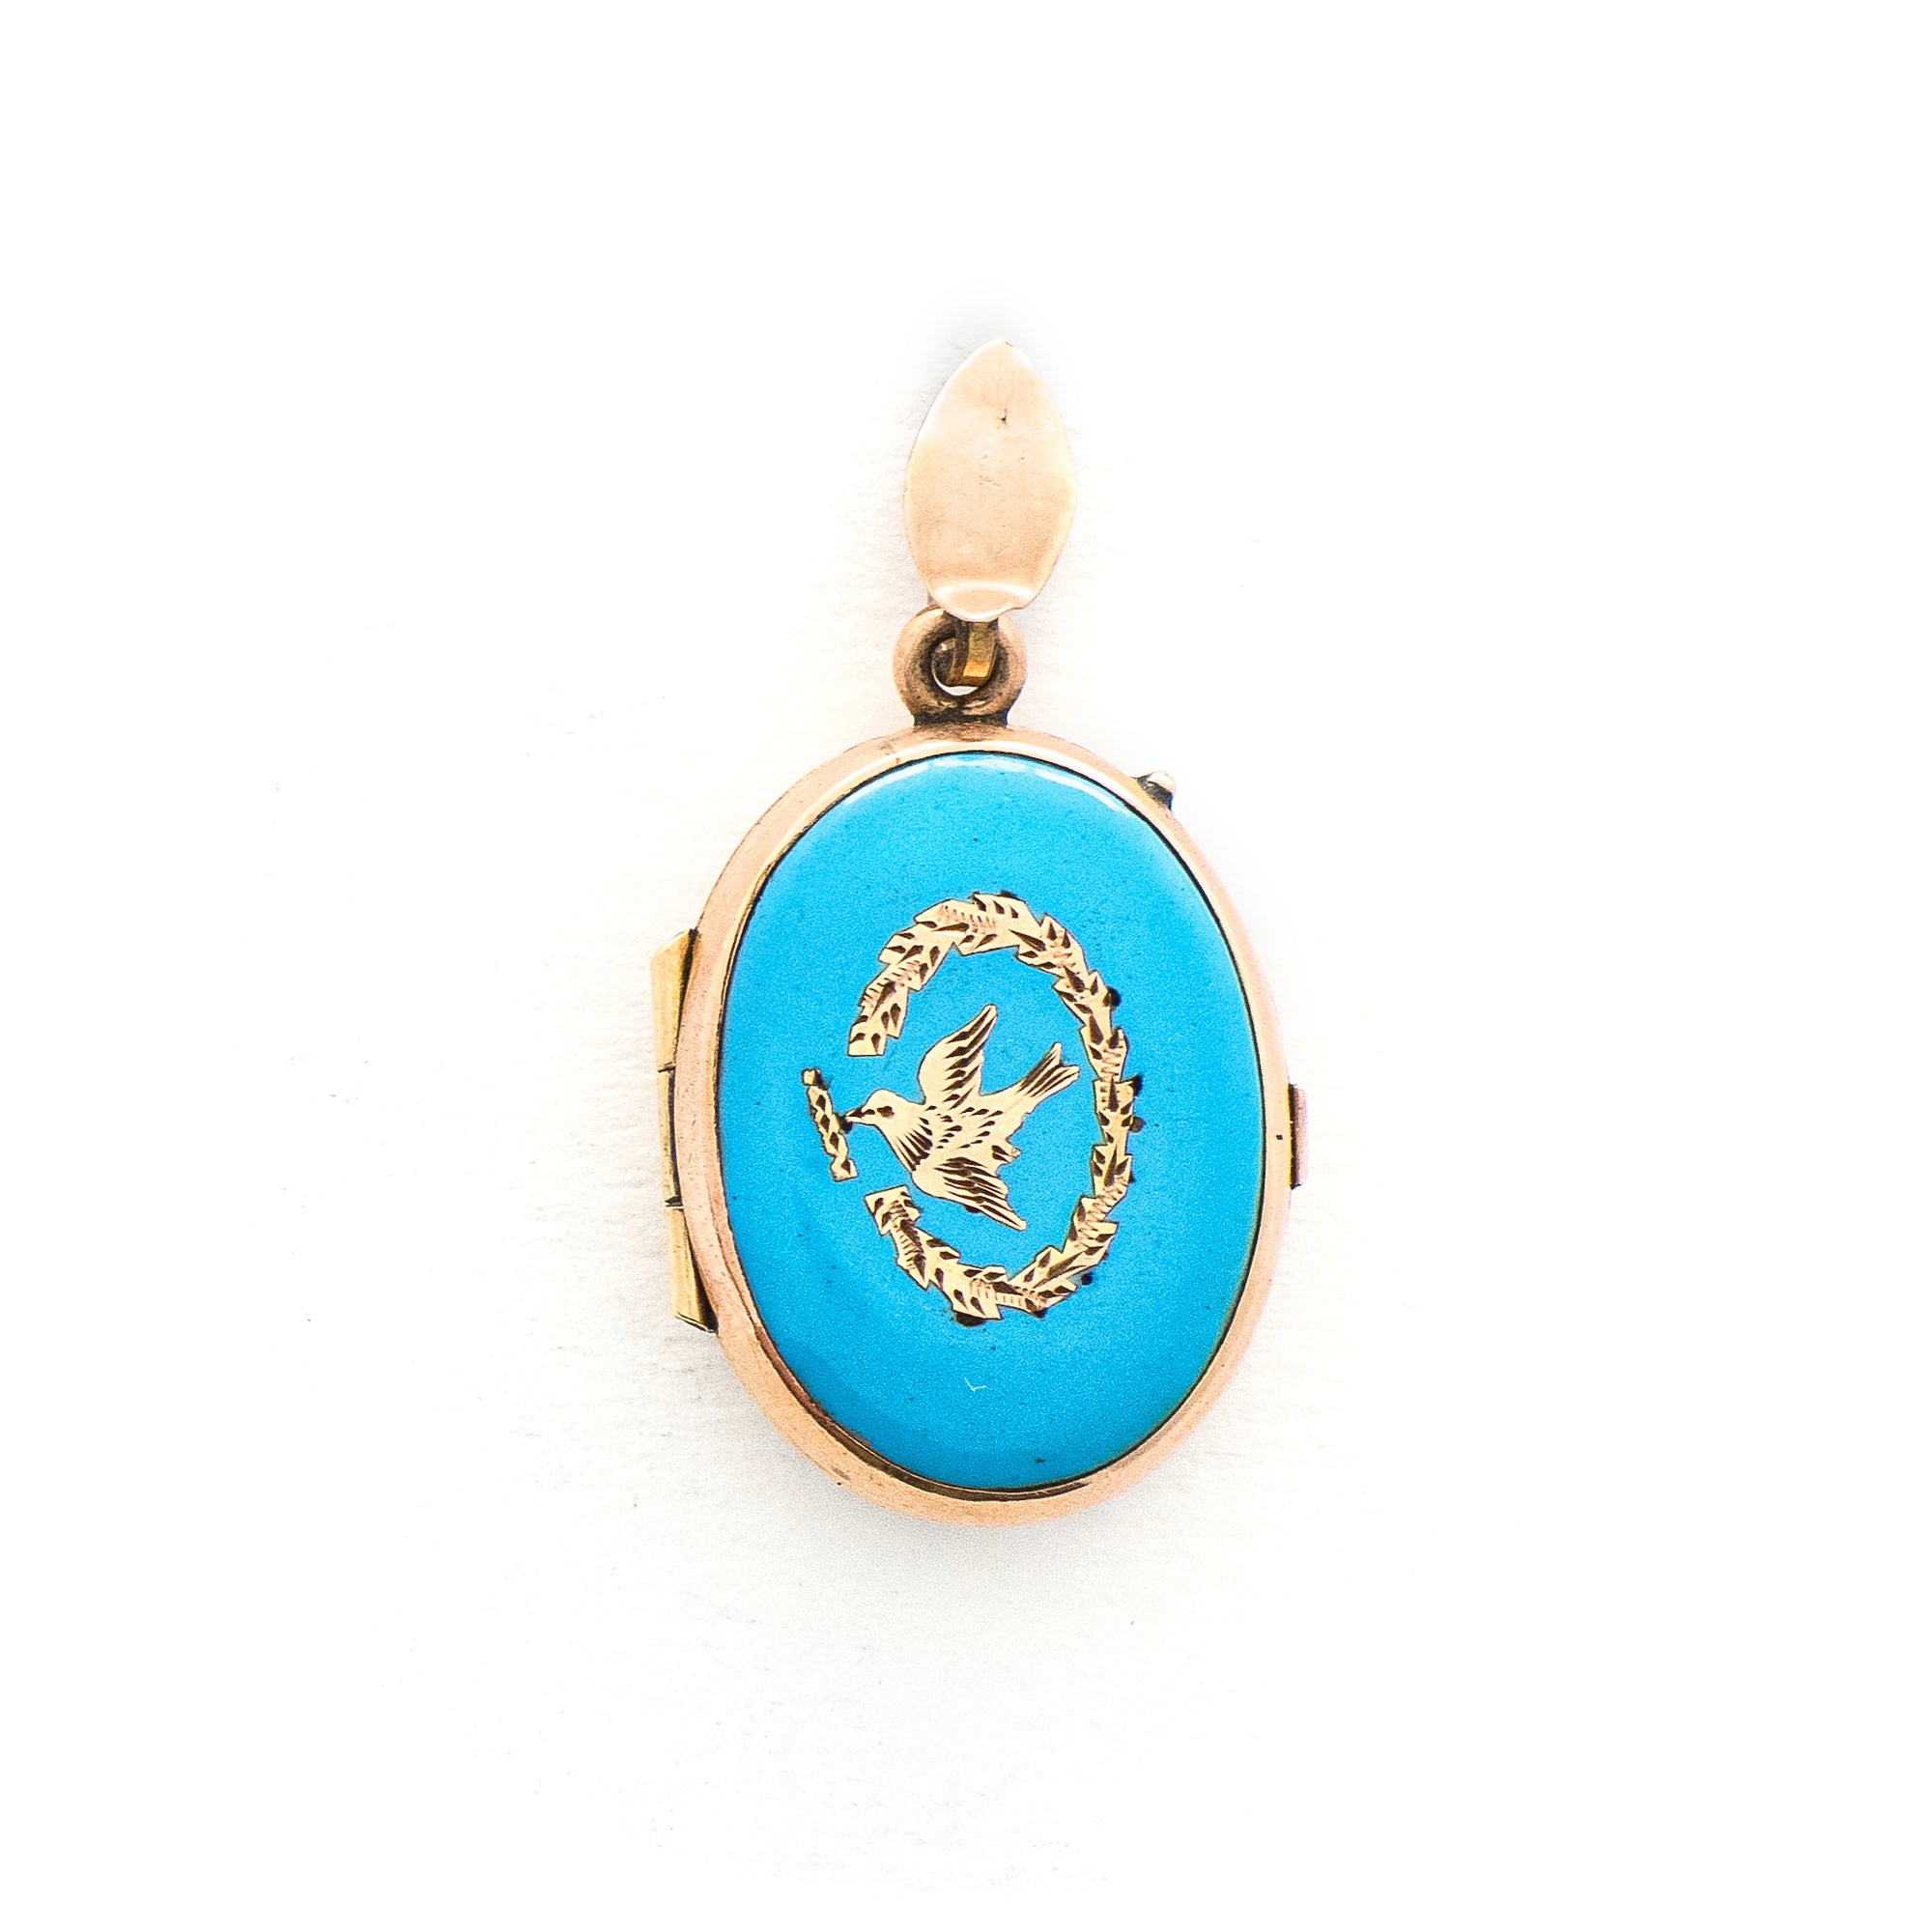 This absolutely gorgeous robin egg blue enamel and gold fill locket is oval shaped and features a sparrow carrying a scroll in it's beak. The sparrow is surrounded by an intricate golden wreath. It opens to hold two photos, includes both original frames and glass, and pairs perfectly with one of our antique gold fill chains.  Front Locket View